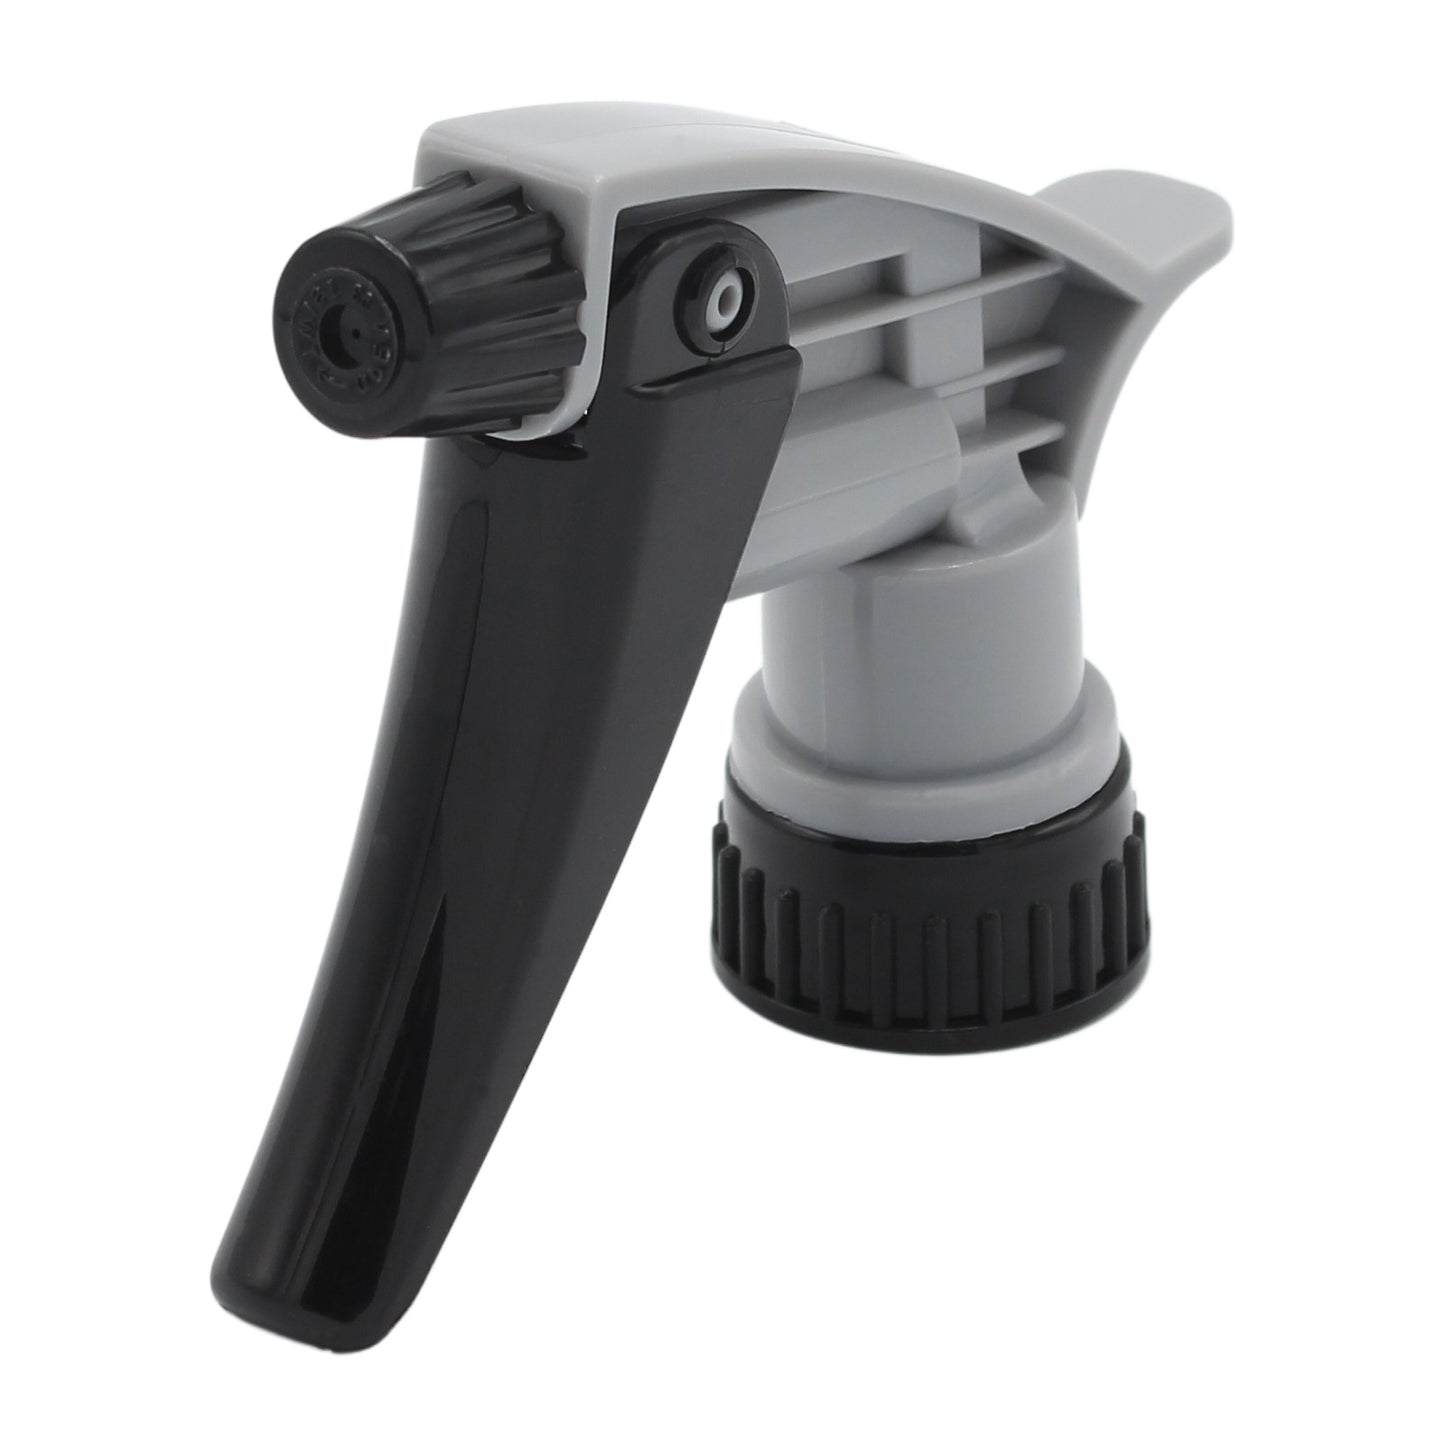 Acid resistant Heavy Duty Industrial Trigger Sprayer offer much extreme resistance to different types of chemicals. grey/black trigger